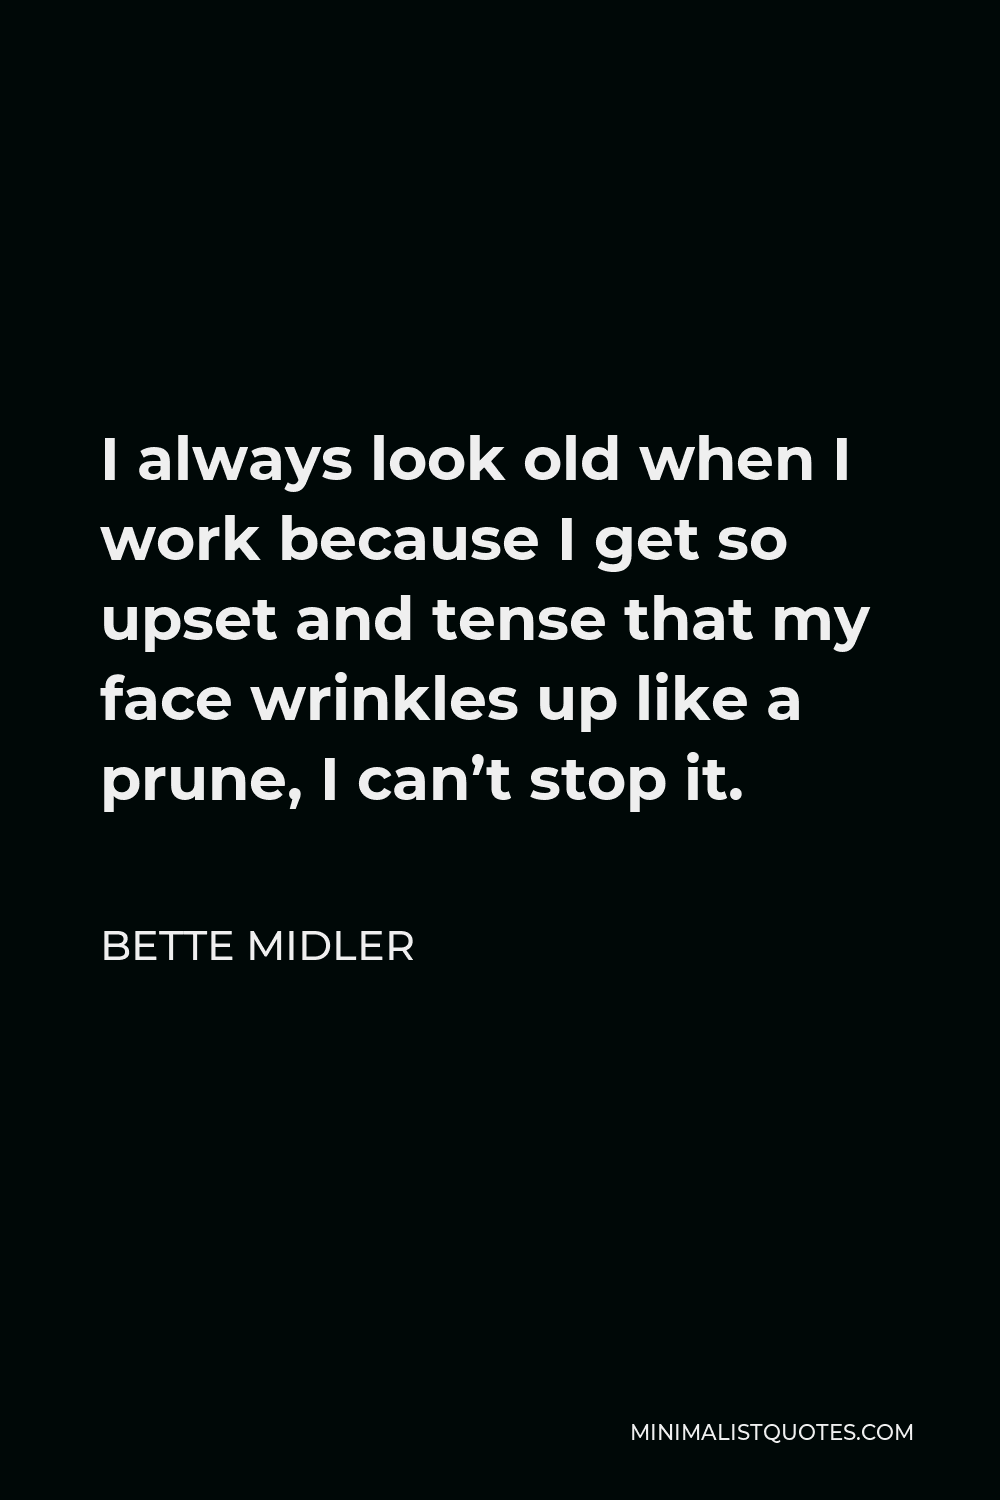 Bette Midler Quote - I always look old when I work because I get so upset and tense that my face wrinkles up like a prune, I can’t stop it.